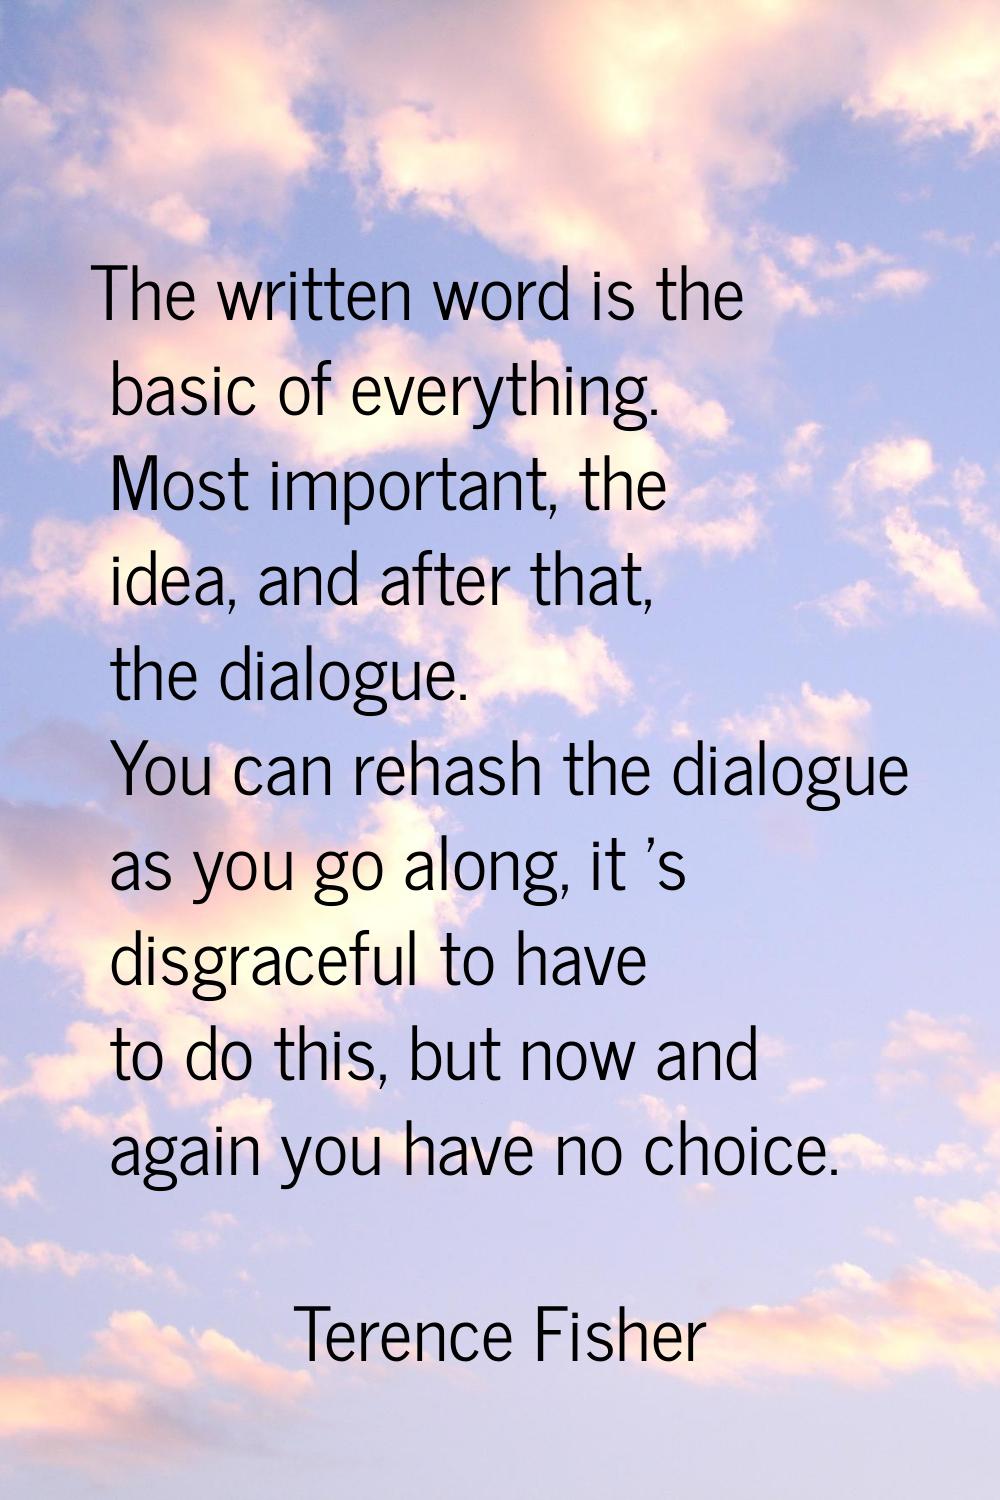 The written word is the basic of everything. Most important, the idea, and after that, the dialogue